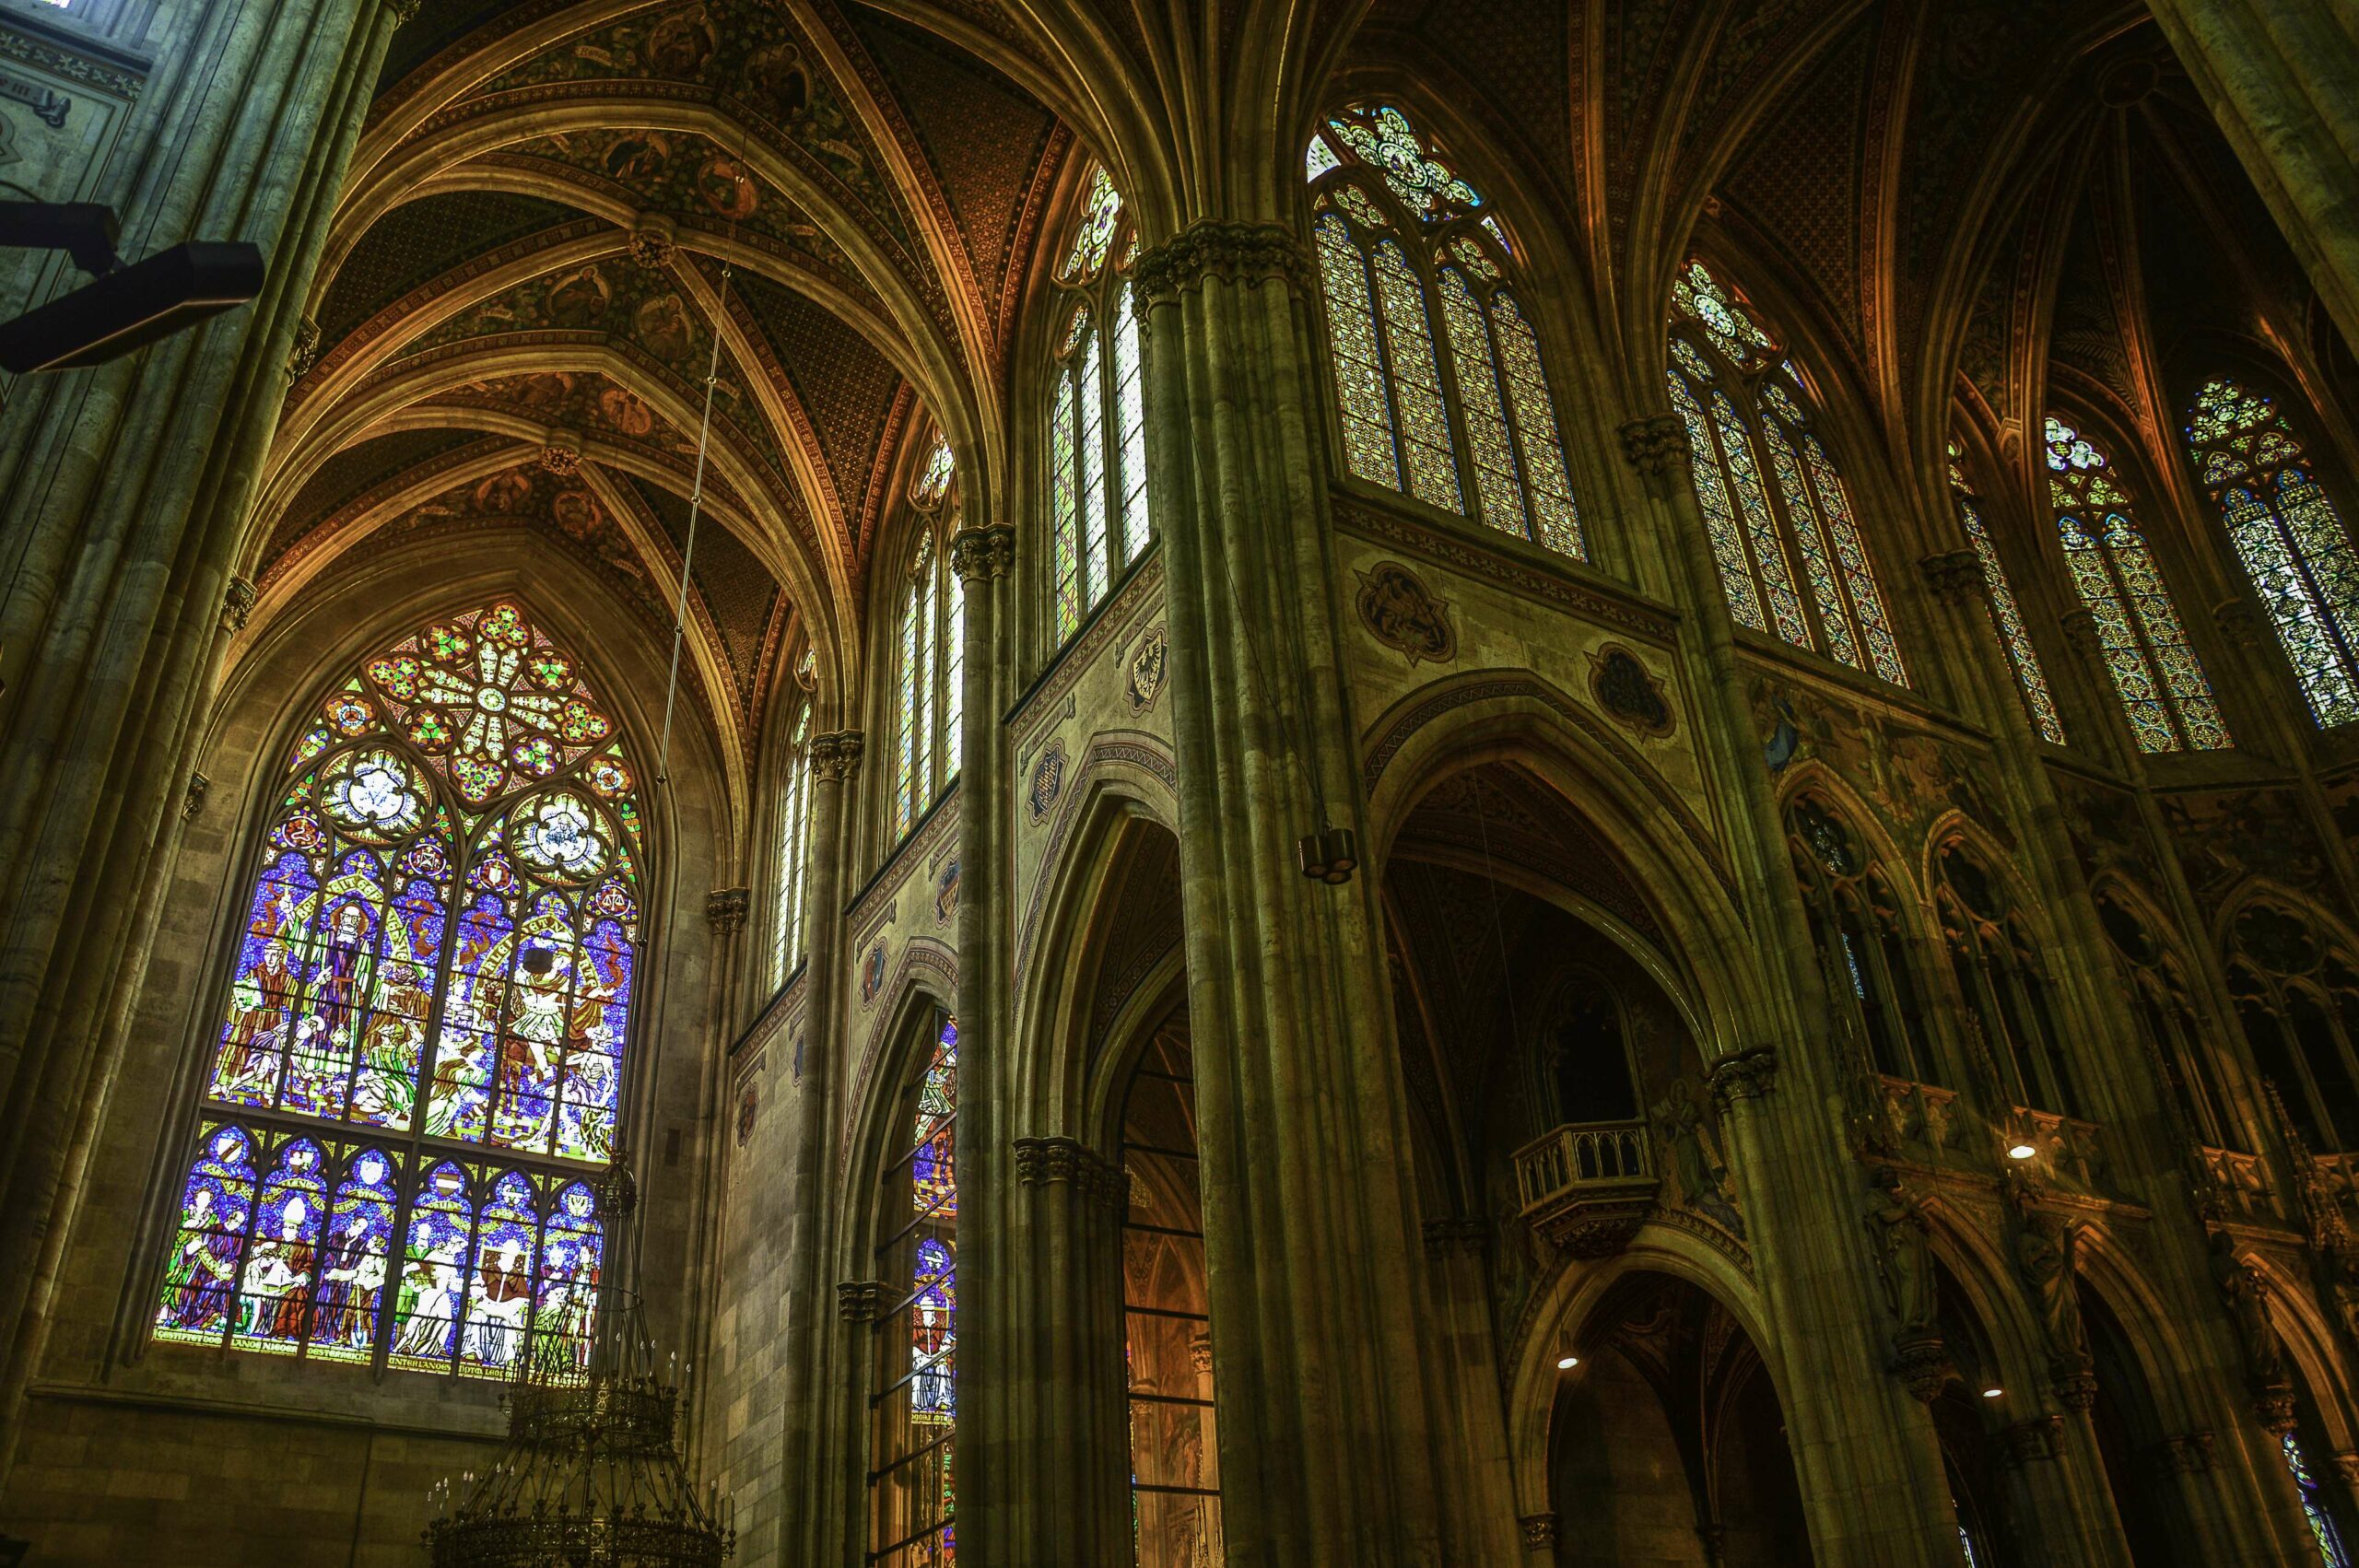 3840x2553 / cathedral, ceiling, church, medieval, old, pillars